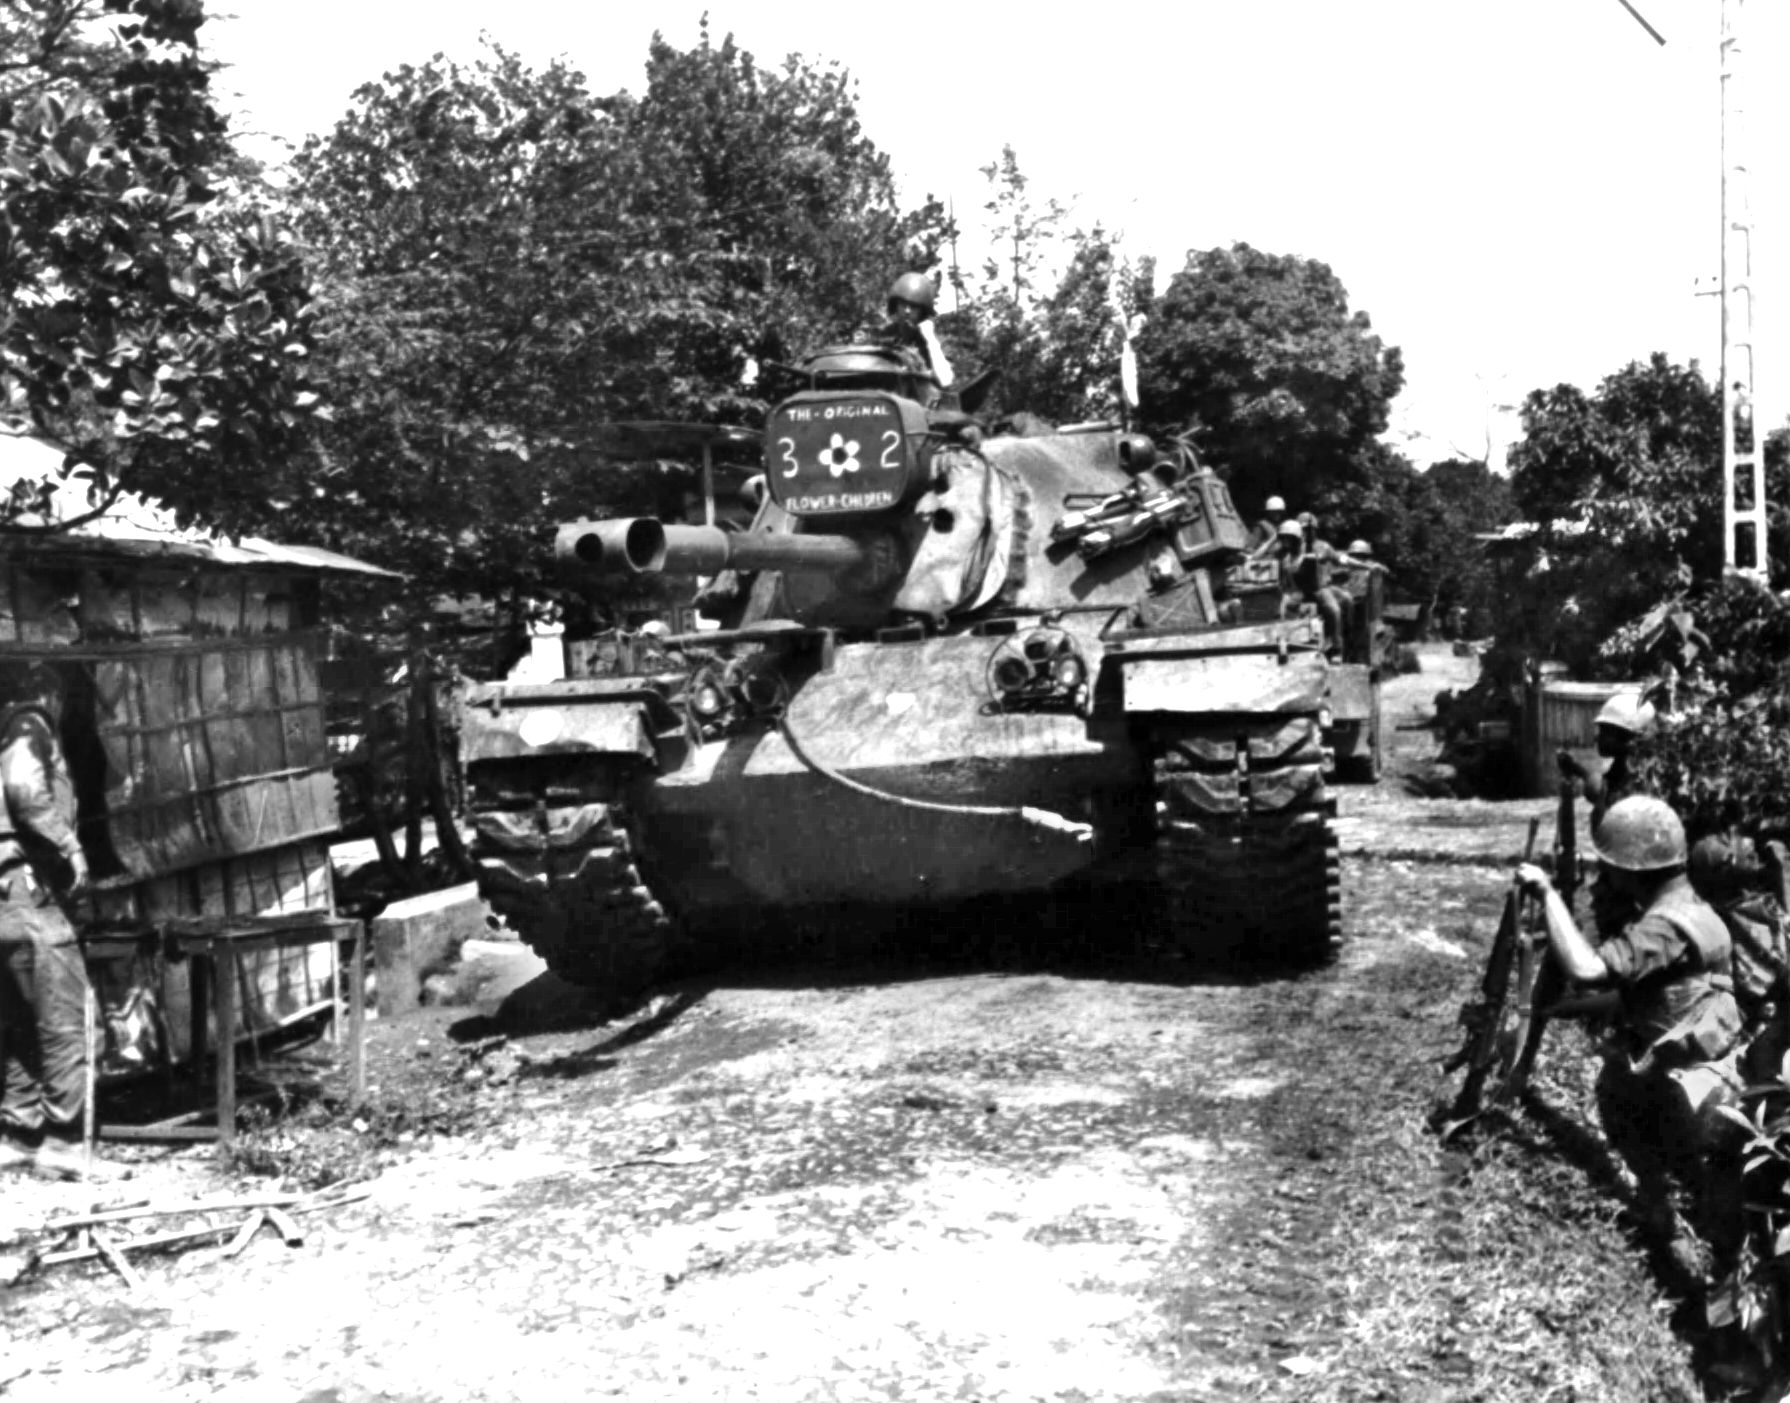 An M48 Patton Tank provides support to the 1st Battalion, 5th Marines in bitter street fighting in the imperial city of Hue, Vietnam, February 12, 1968.